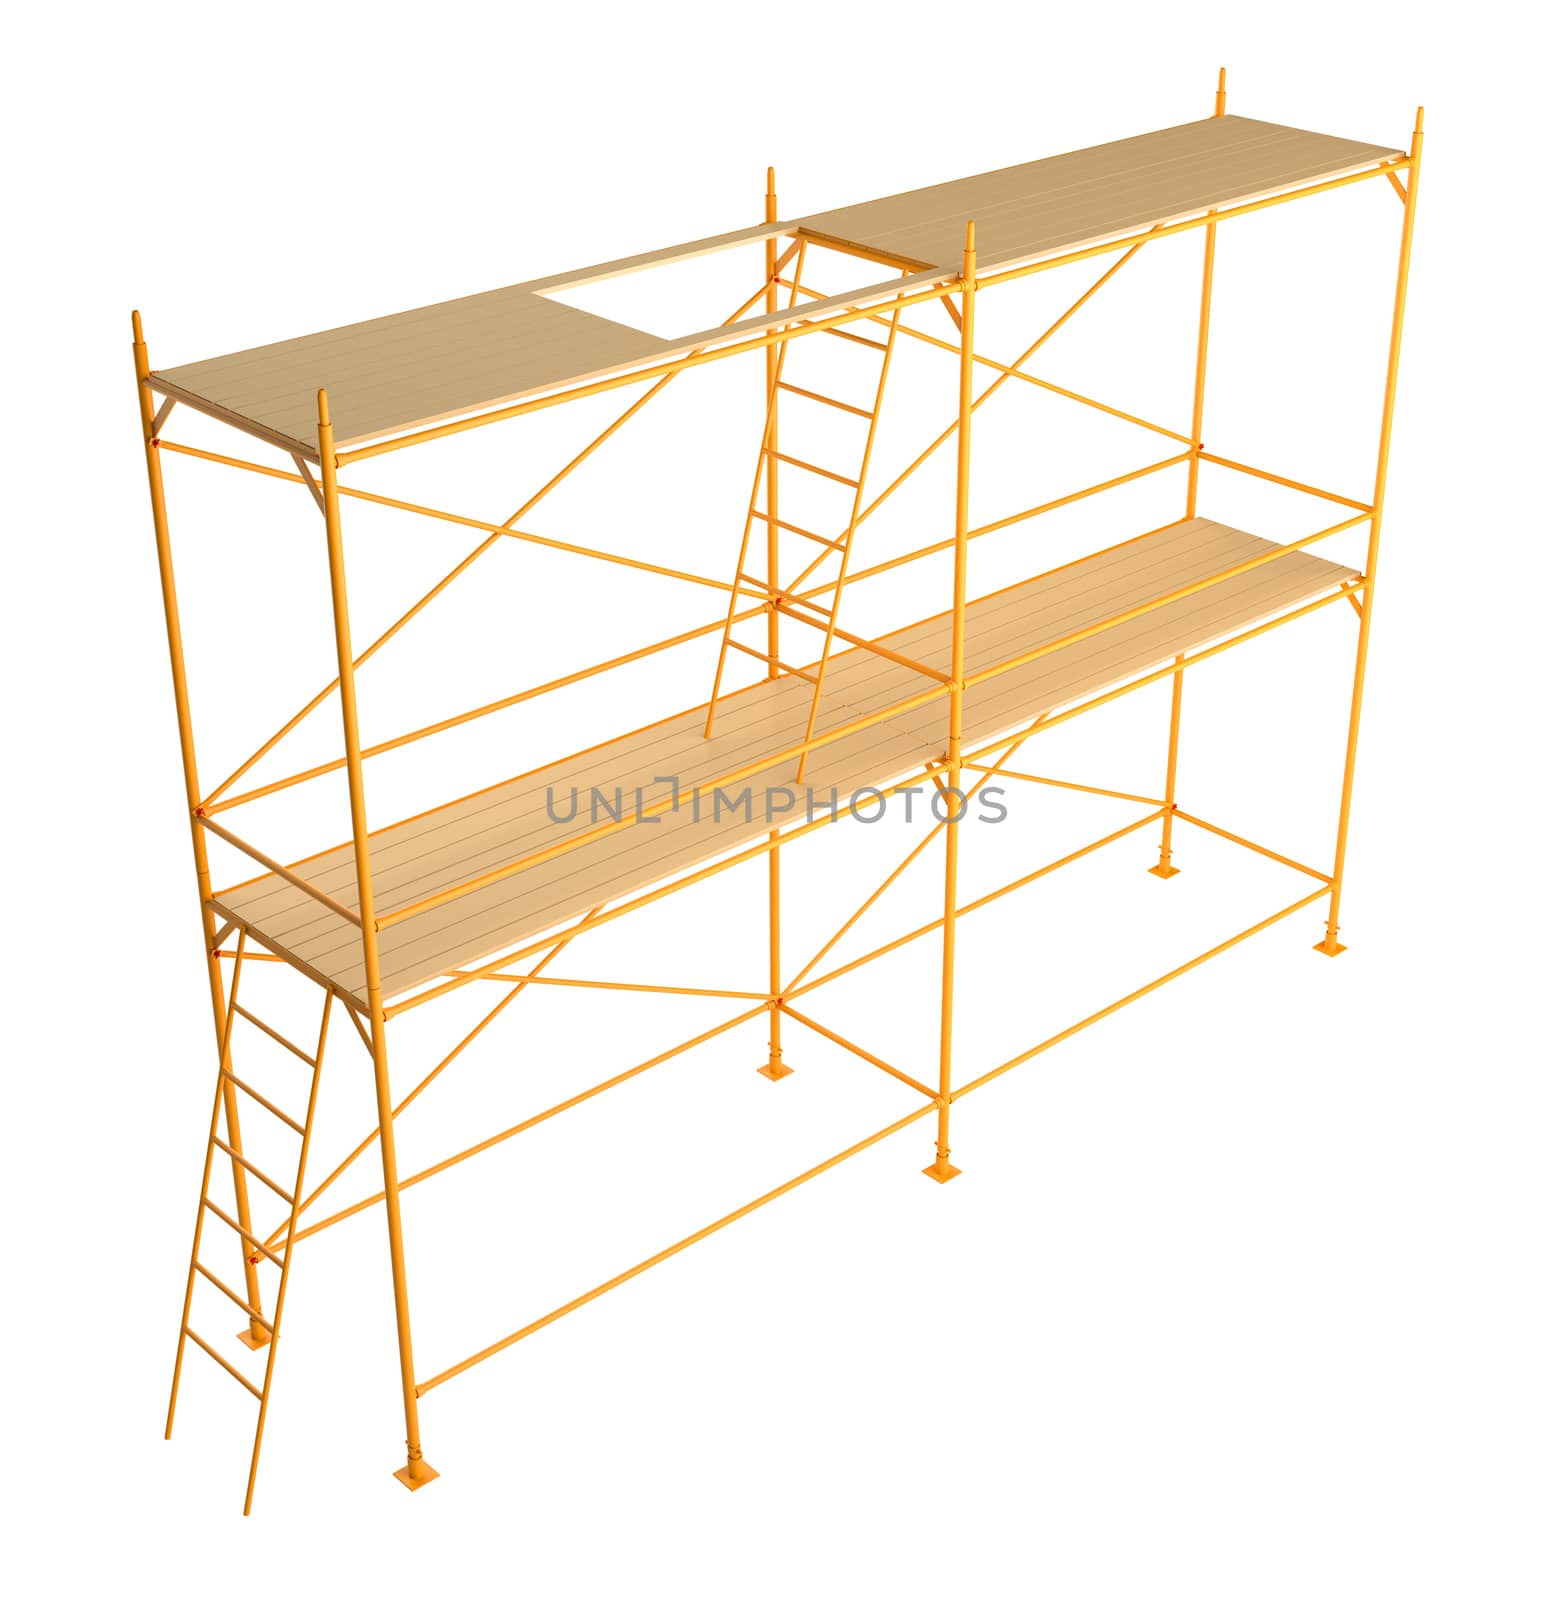 Scaffold isolated on white background. 3D illustration